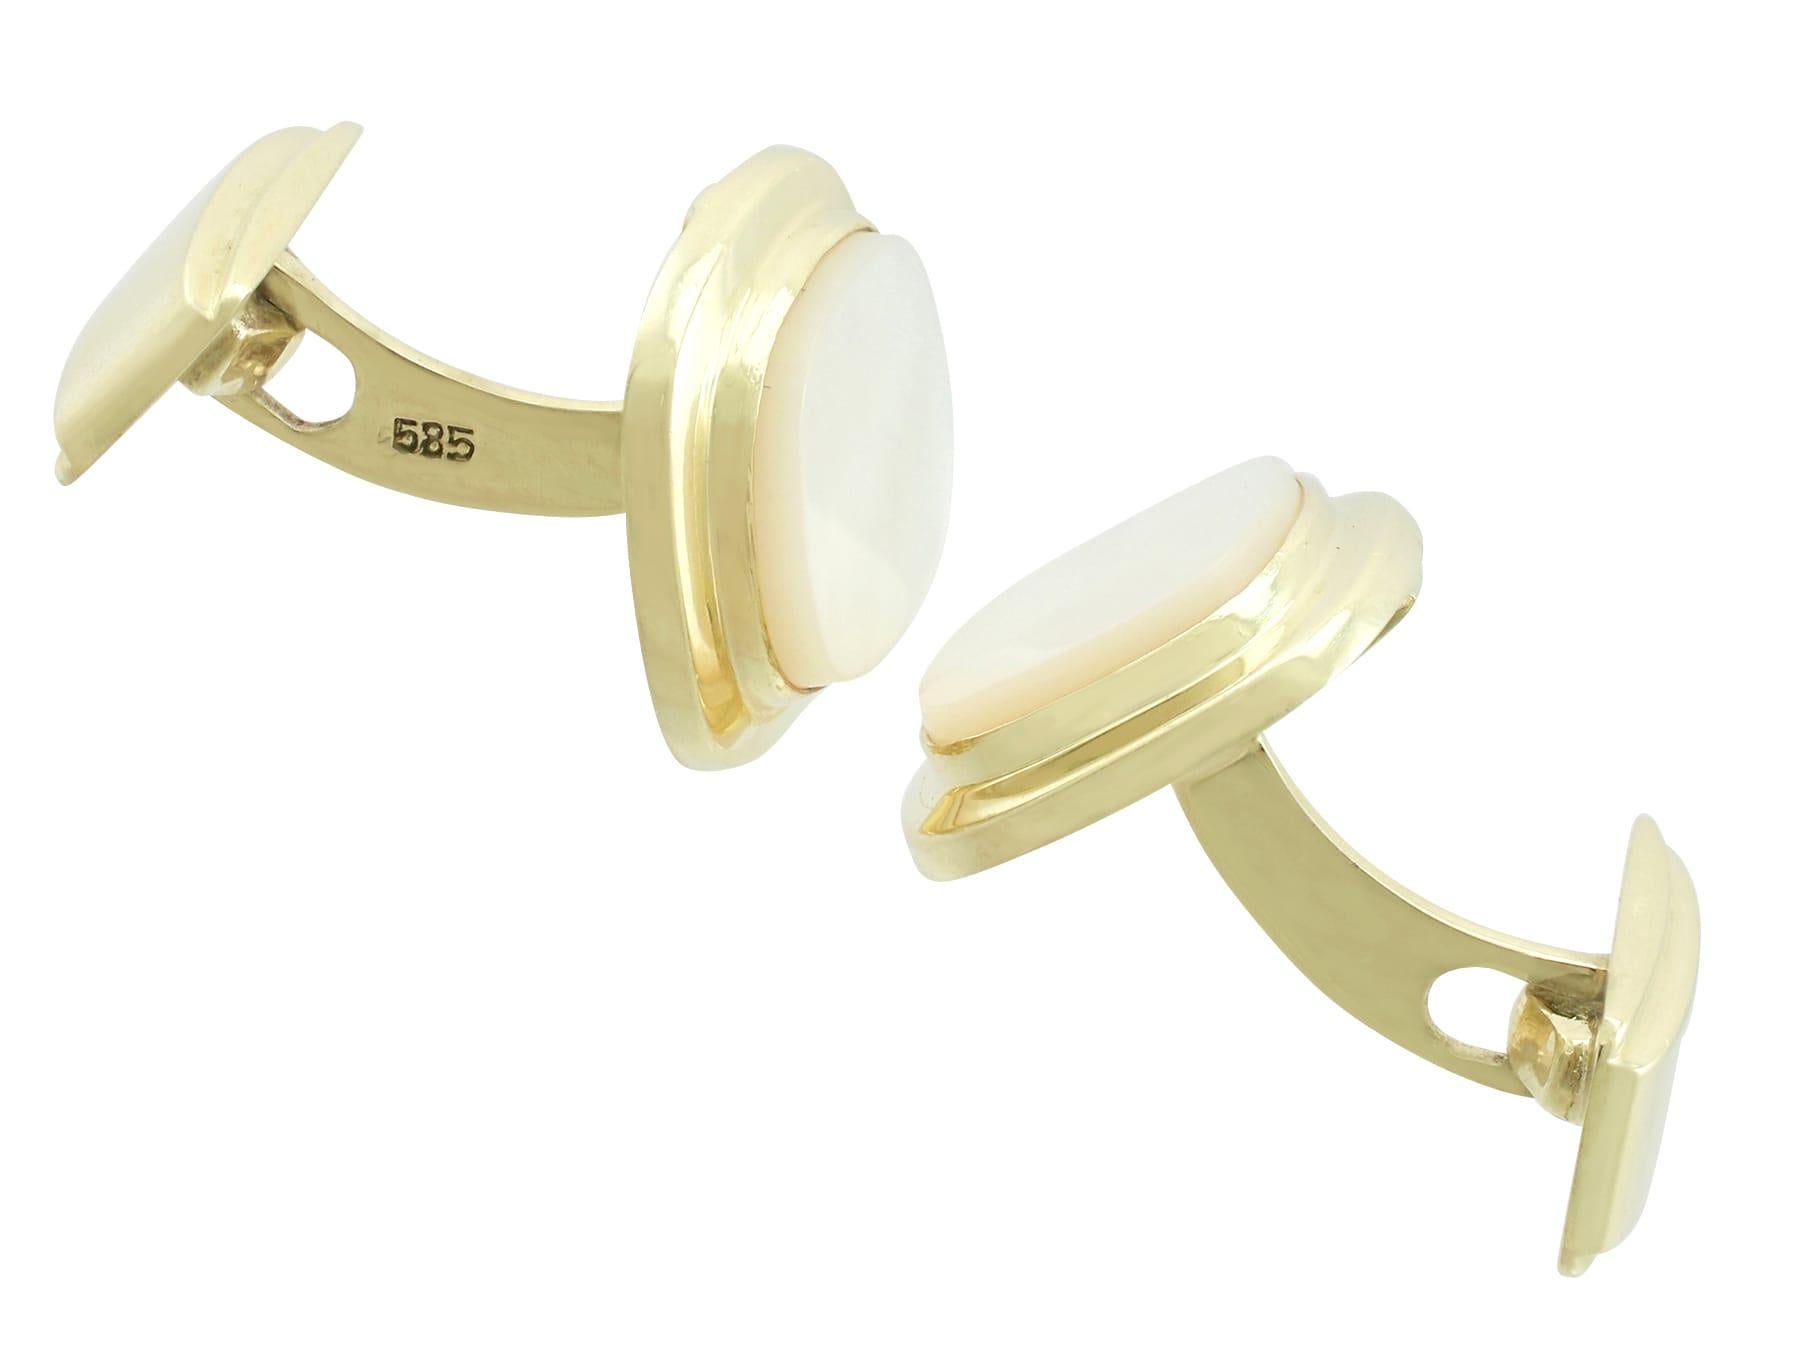 1960s Mother of Pearl Yellow Gold Cufflinks In Excellent Condition For Sale In Jesmond, Newcastle Upon Tyne